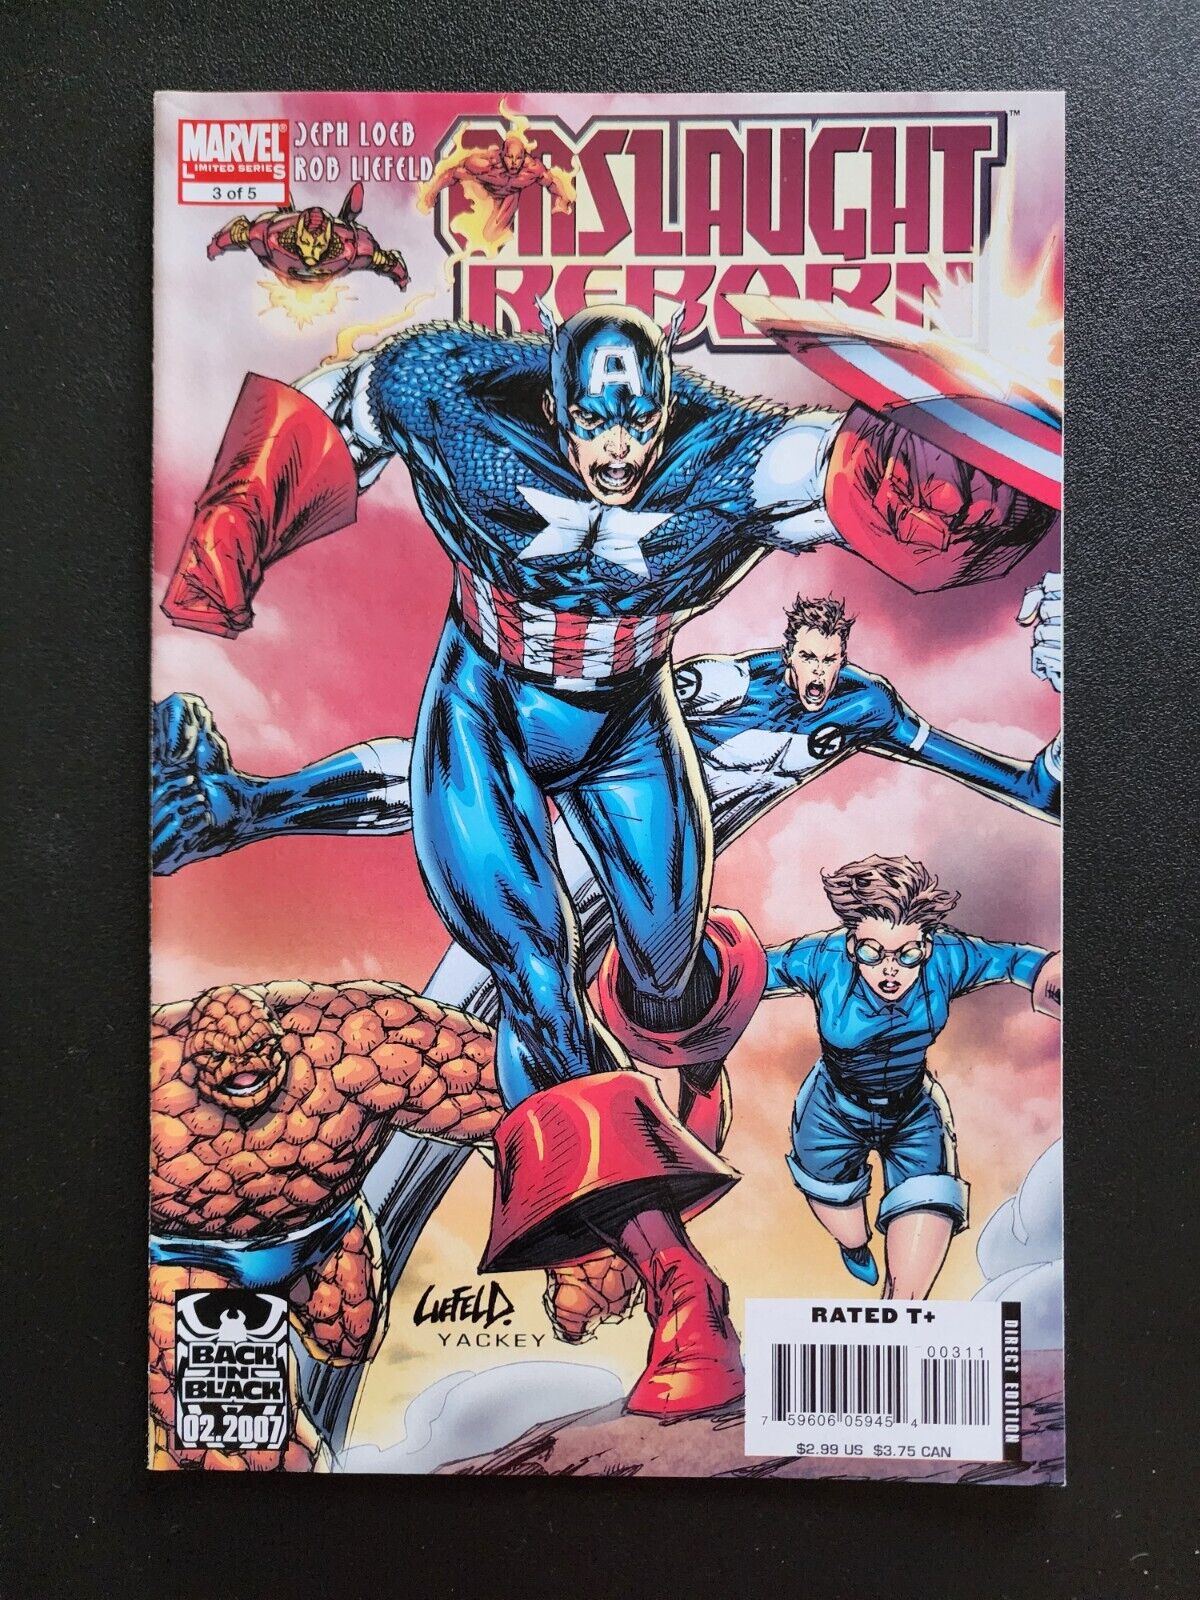 Marvel Comics Onslaught Reborn #3 March 2007 Rob Liefeld Cover